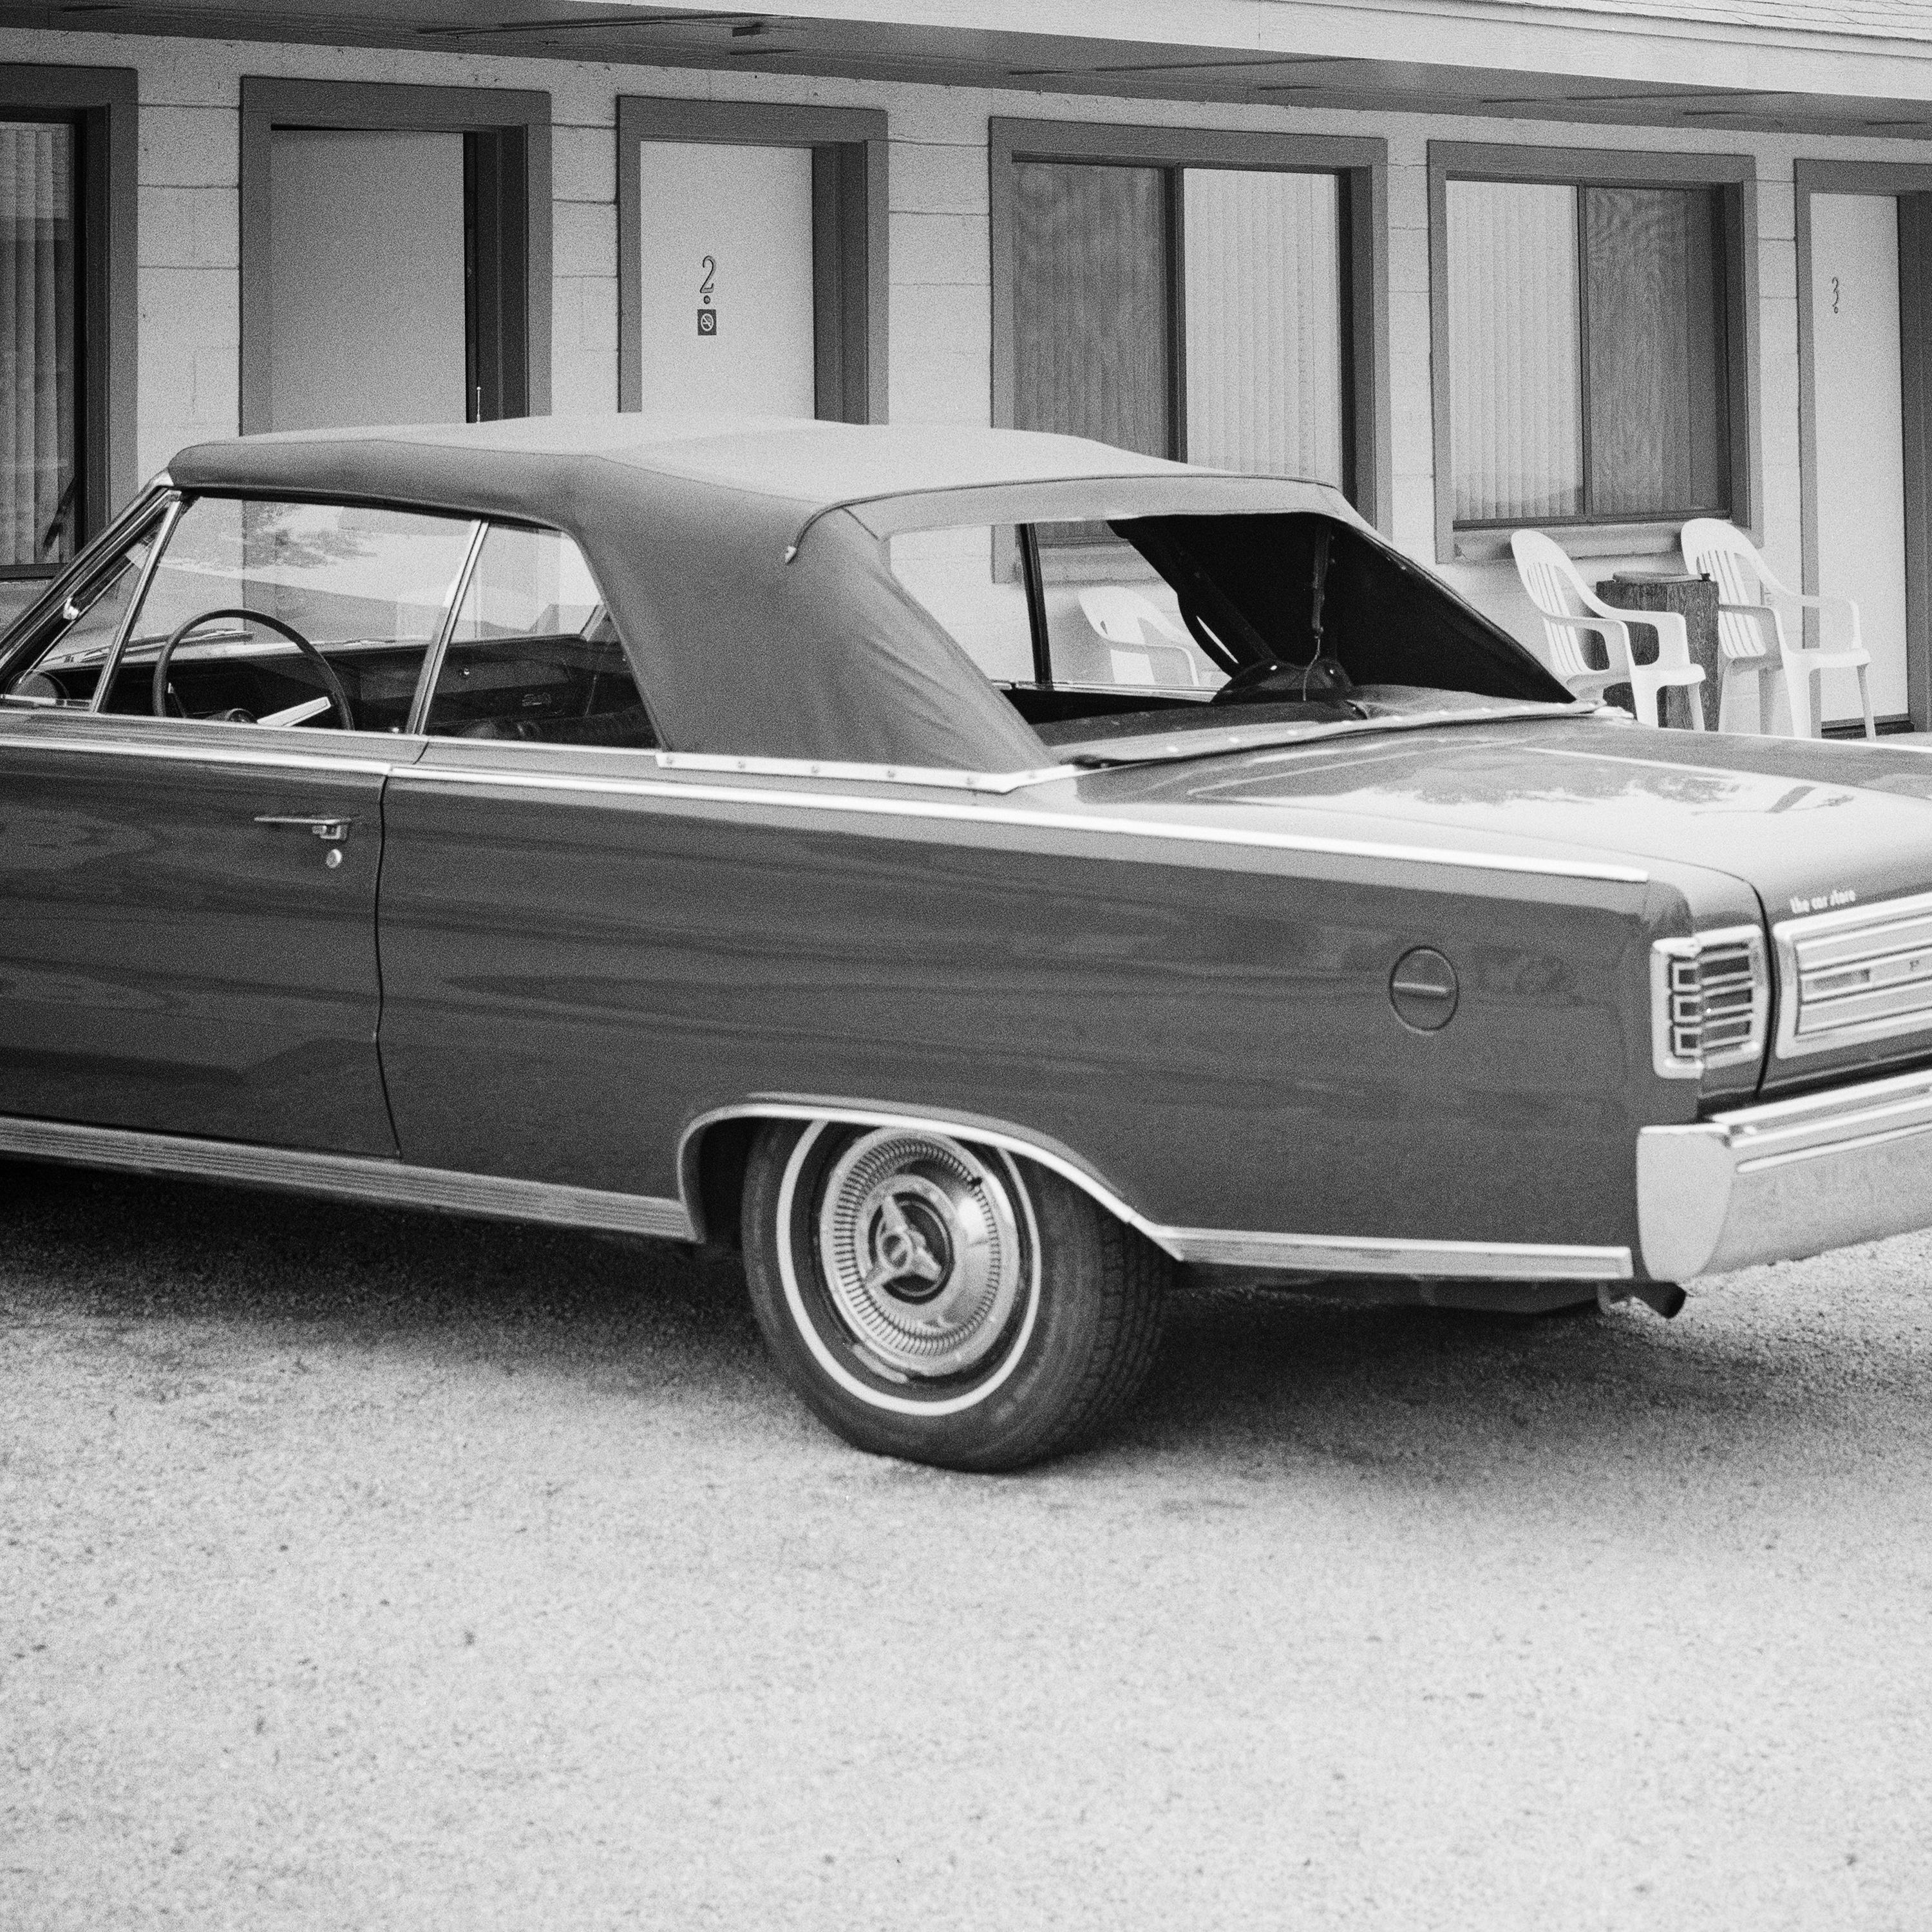 1967 Plymouth, Oldtimer, Route 66, USA, black white art landscape photography For Sale 4